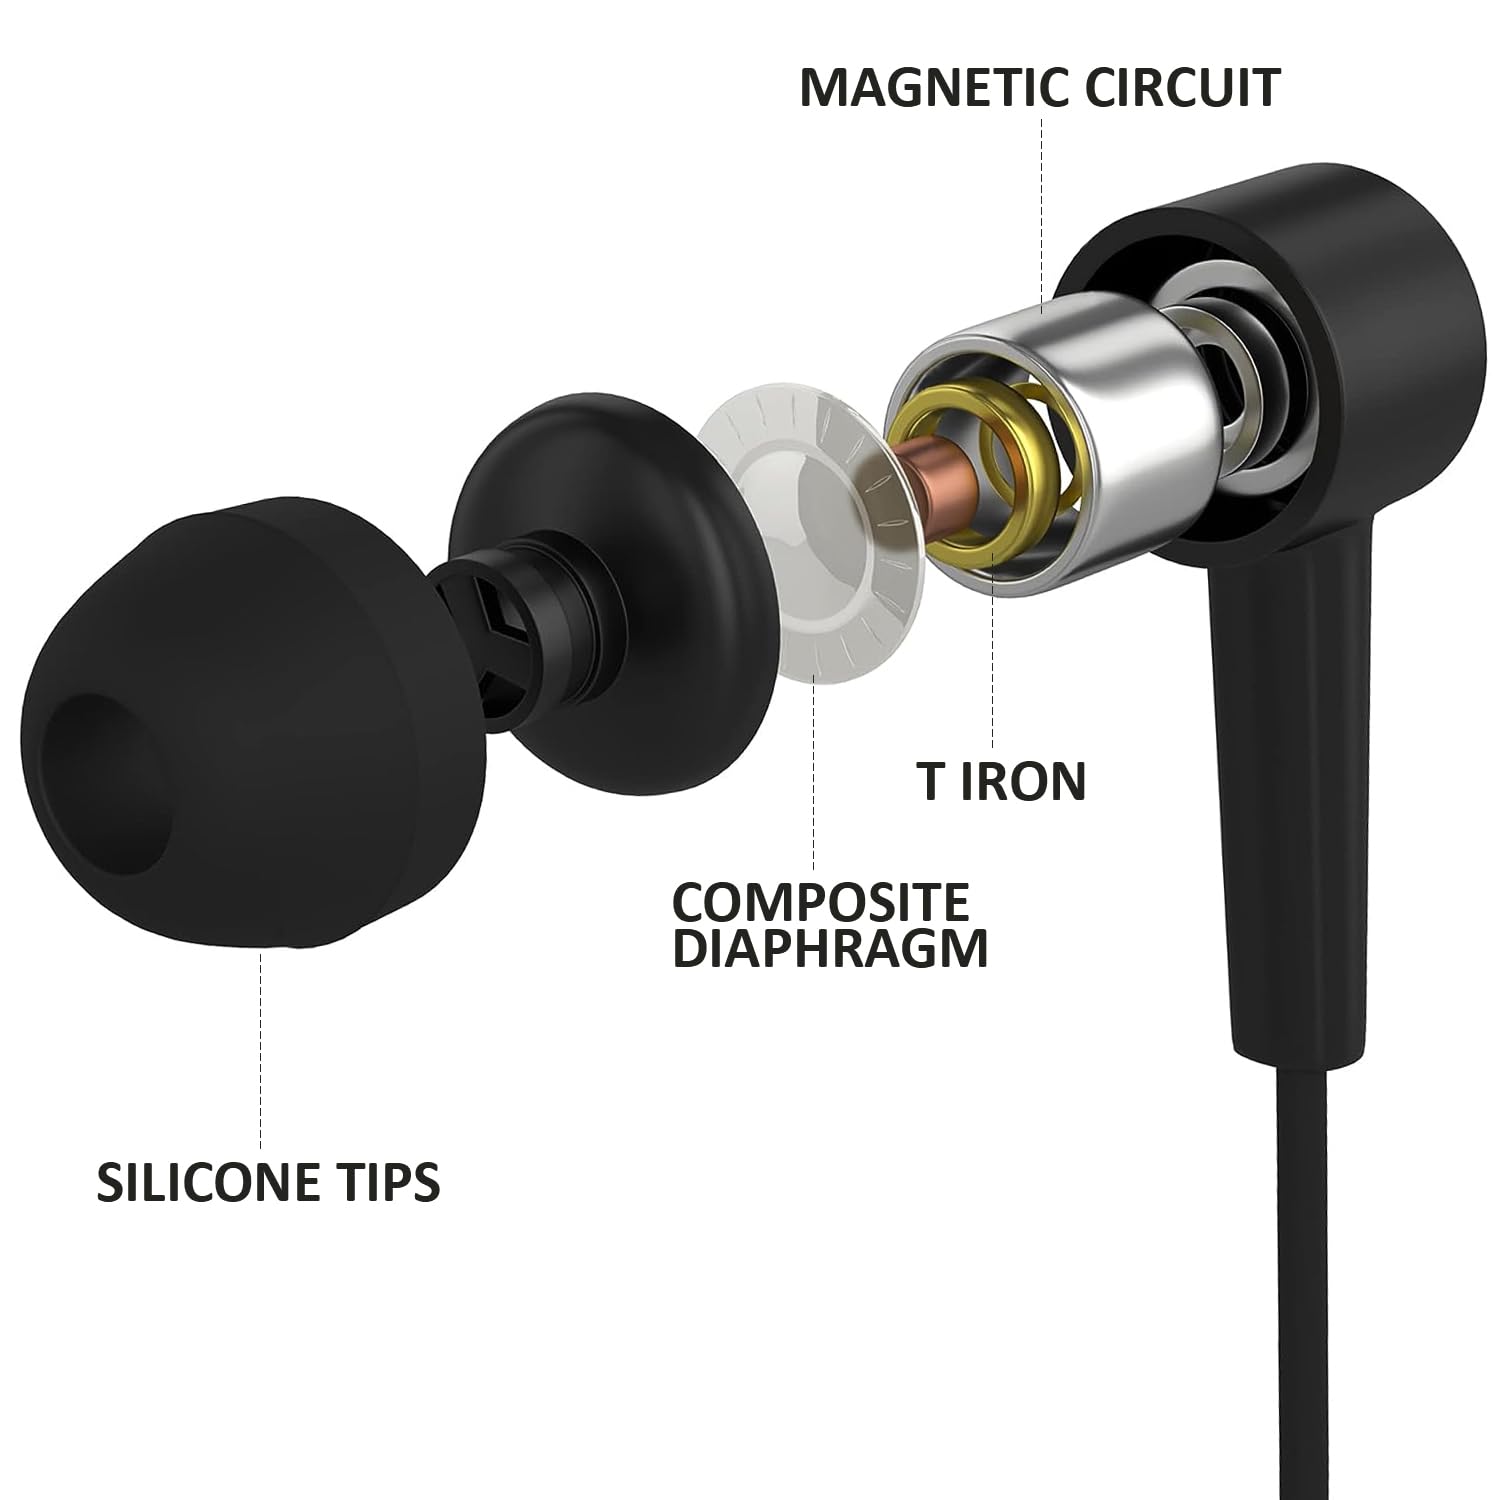 Maeline Bulk Earbuds 10 Pack Black in-Ear Stereo Headphones for School Classroom, Library, Travel, Gym 3.5mm Jack, Tangle-Free Wired Earphones for MP3, Phones, Computer and Laptops